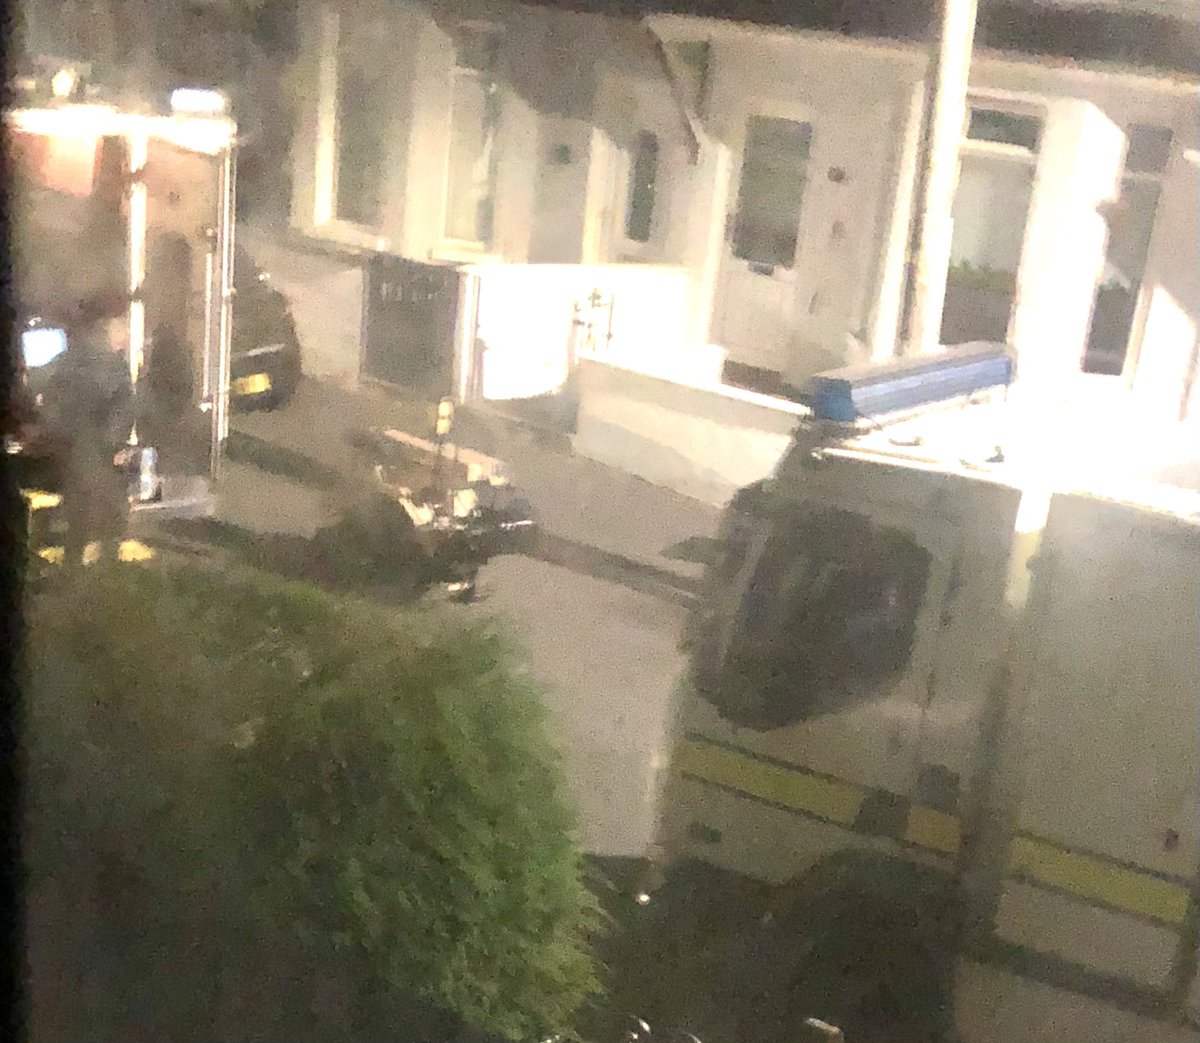 Quite possibly the most bizarre night in our street where the most drama is usually passive aggressive parking wars. They had to pick a night I neeeeeded sleep 🤯 #bombsquad #psni #whattheheck? #westbelfast  #northbelfast #mybedroom